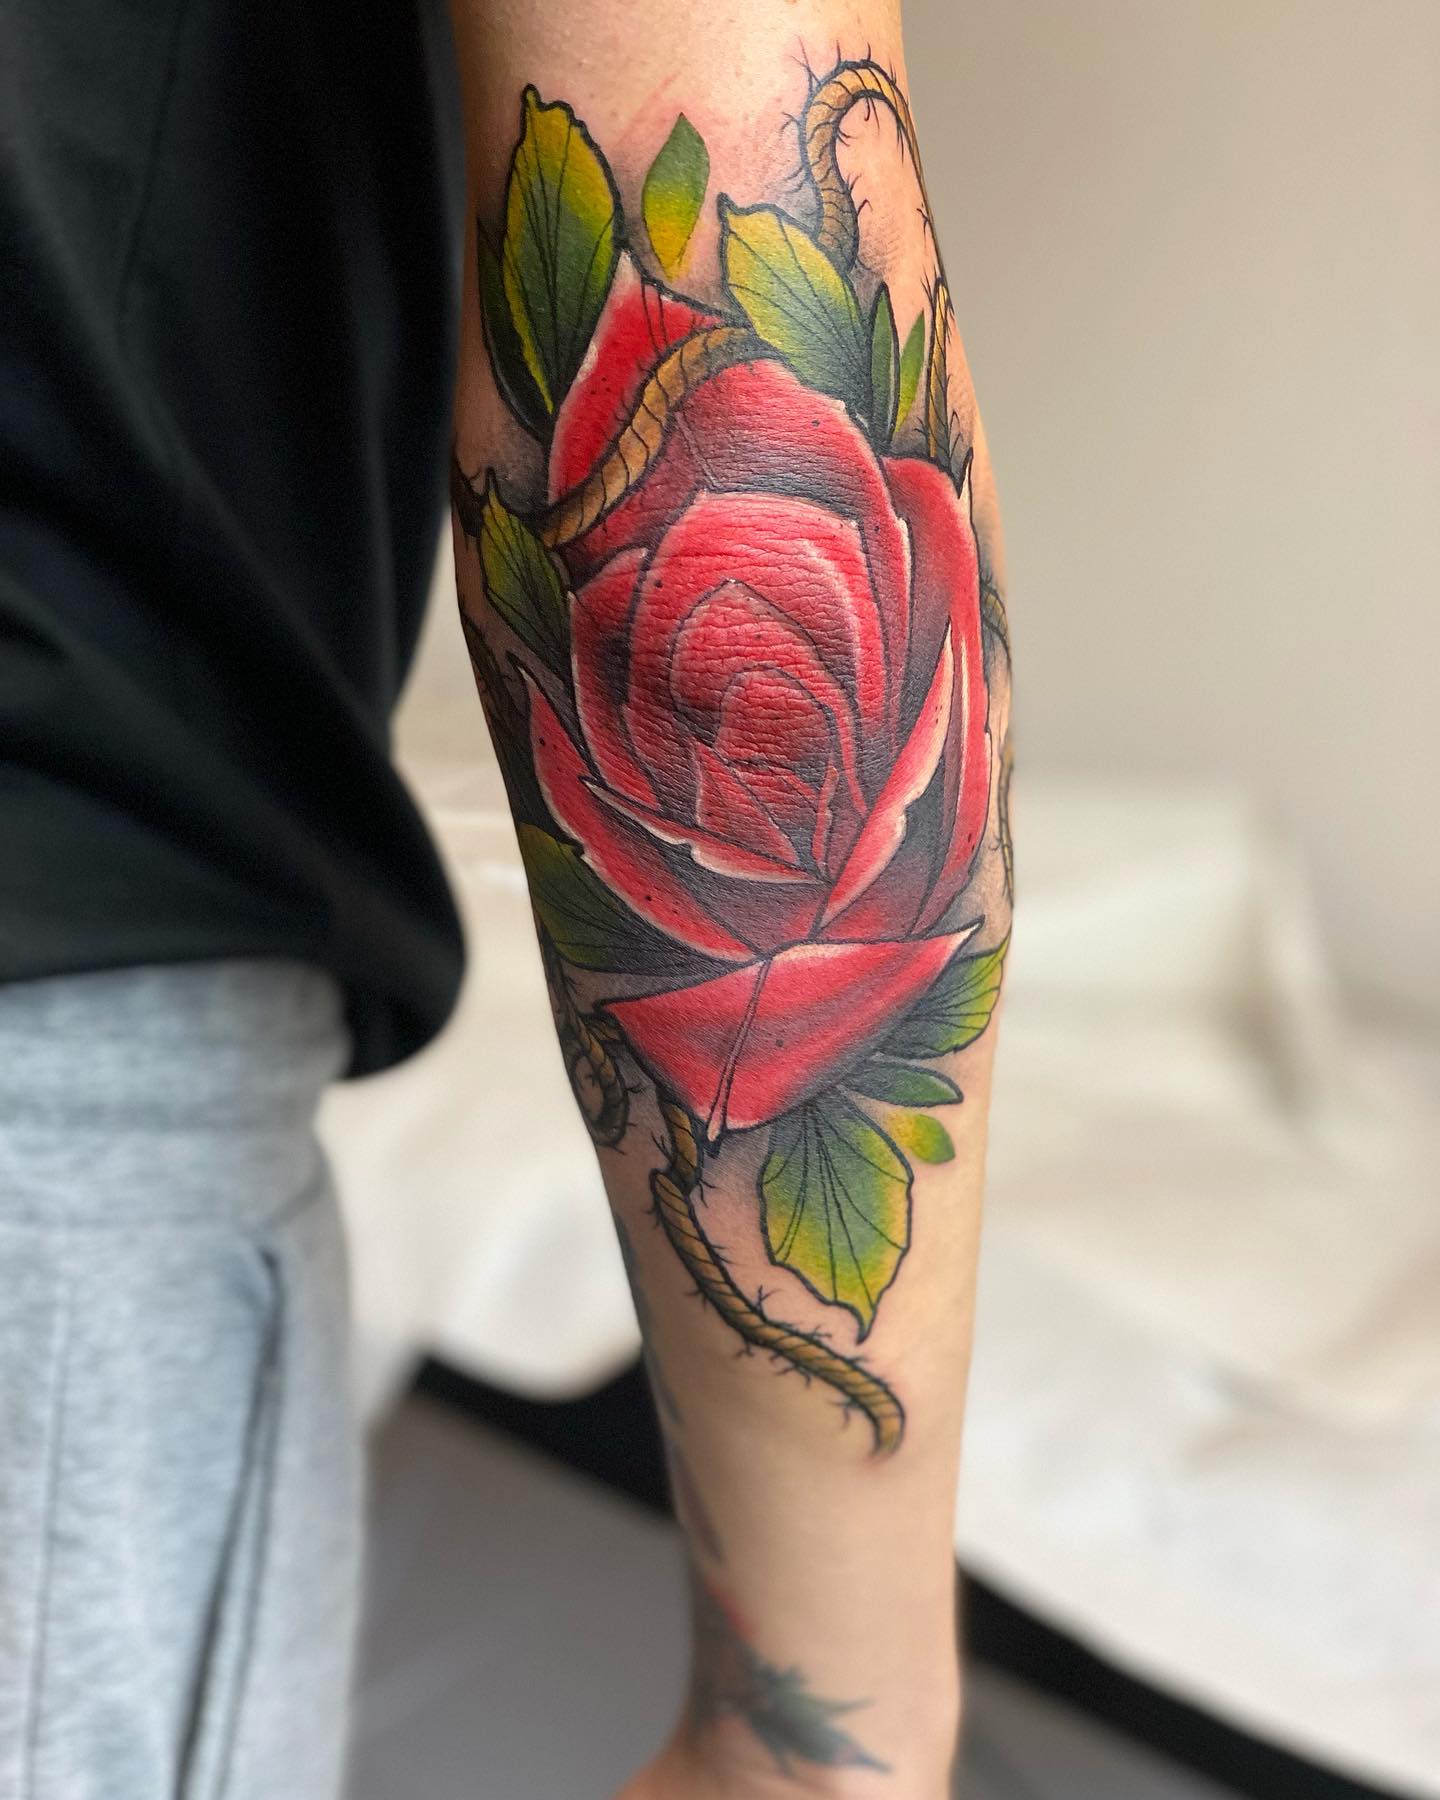 A rose is a symbol of love and admiration. If you are a passionate soul and you know of someone worthy of dedicating this tattoo, this will suit you. Show off your love and romantic side with it.